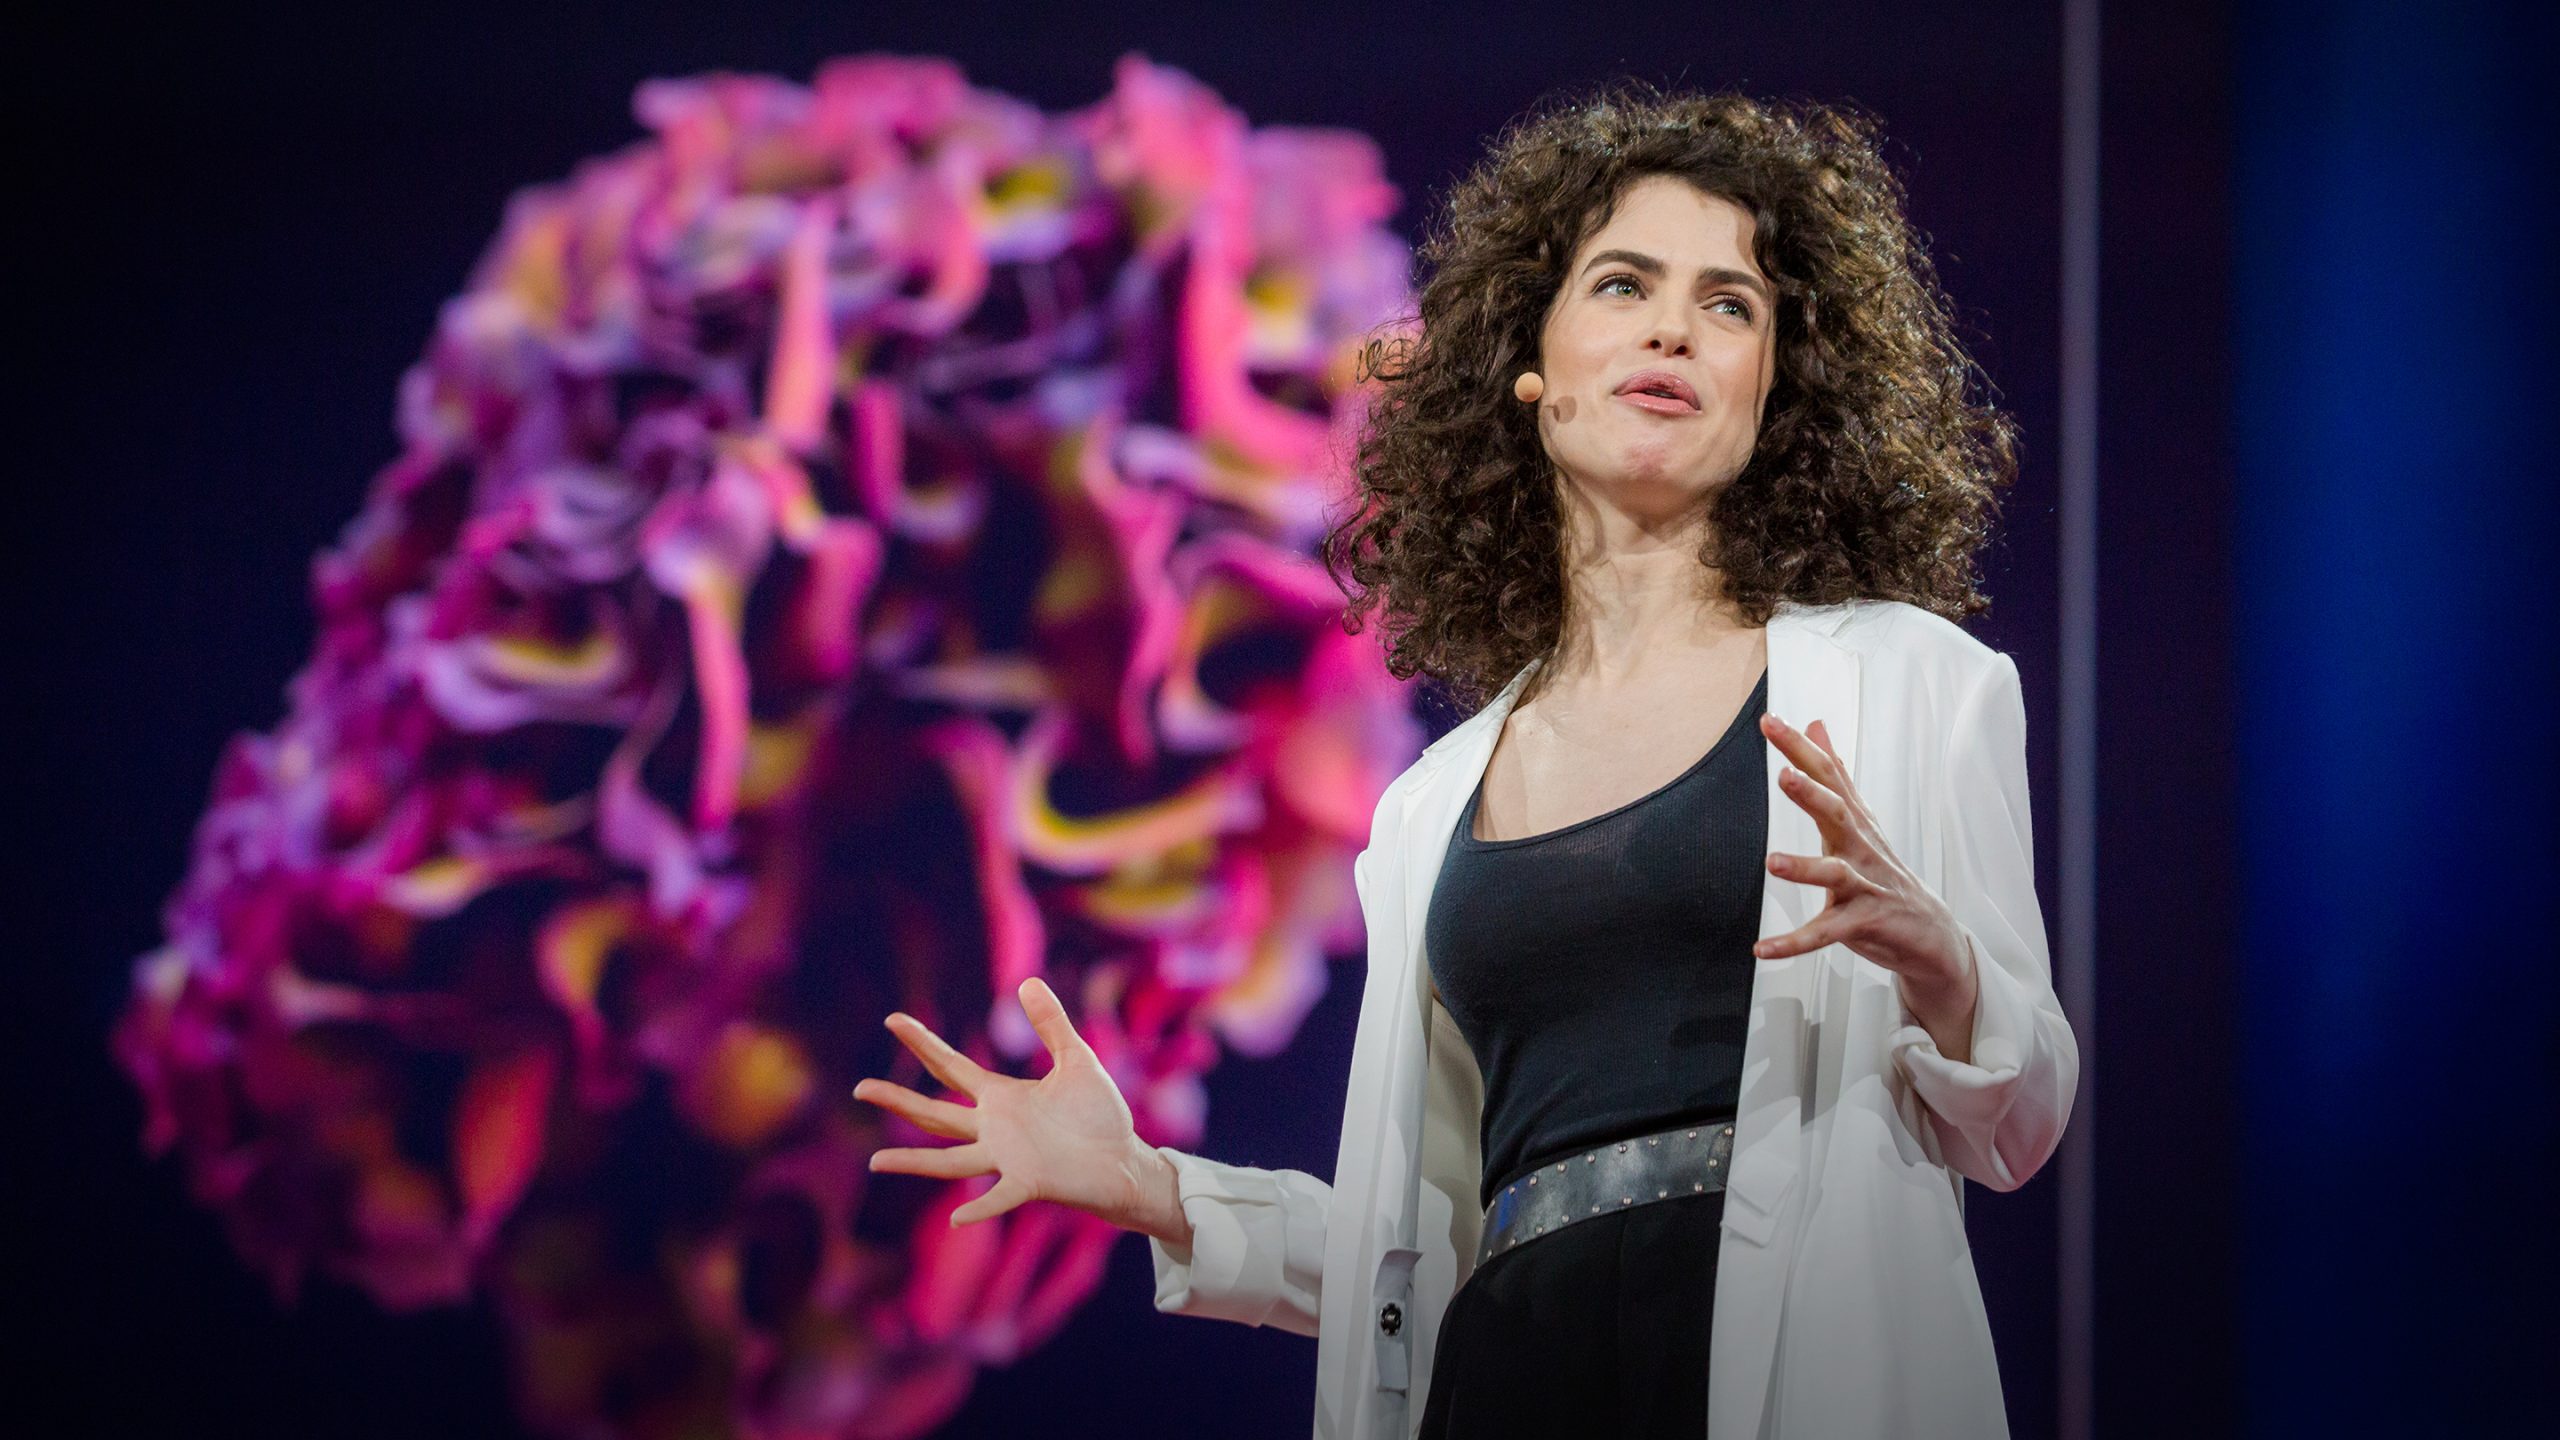 Neri Oxman, accused of plagiarism days after Claudine Gay resigns post thumbnail image